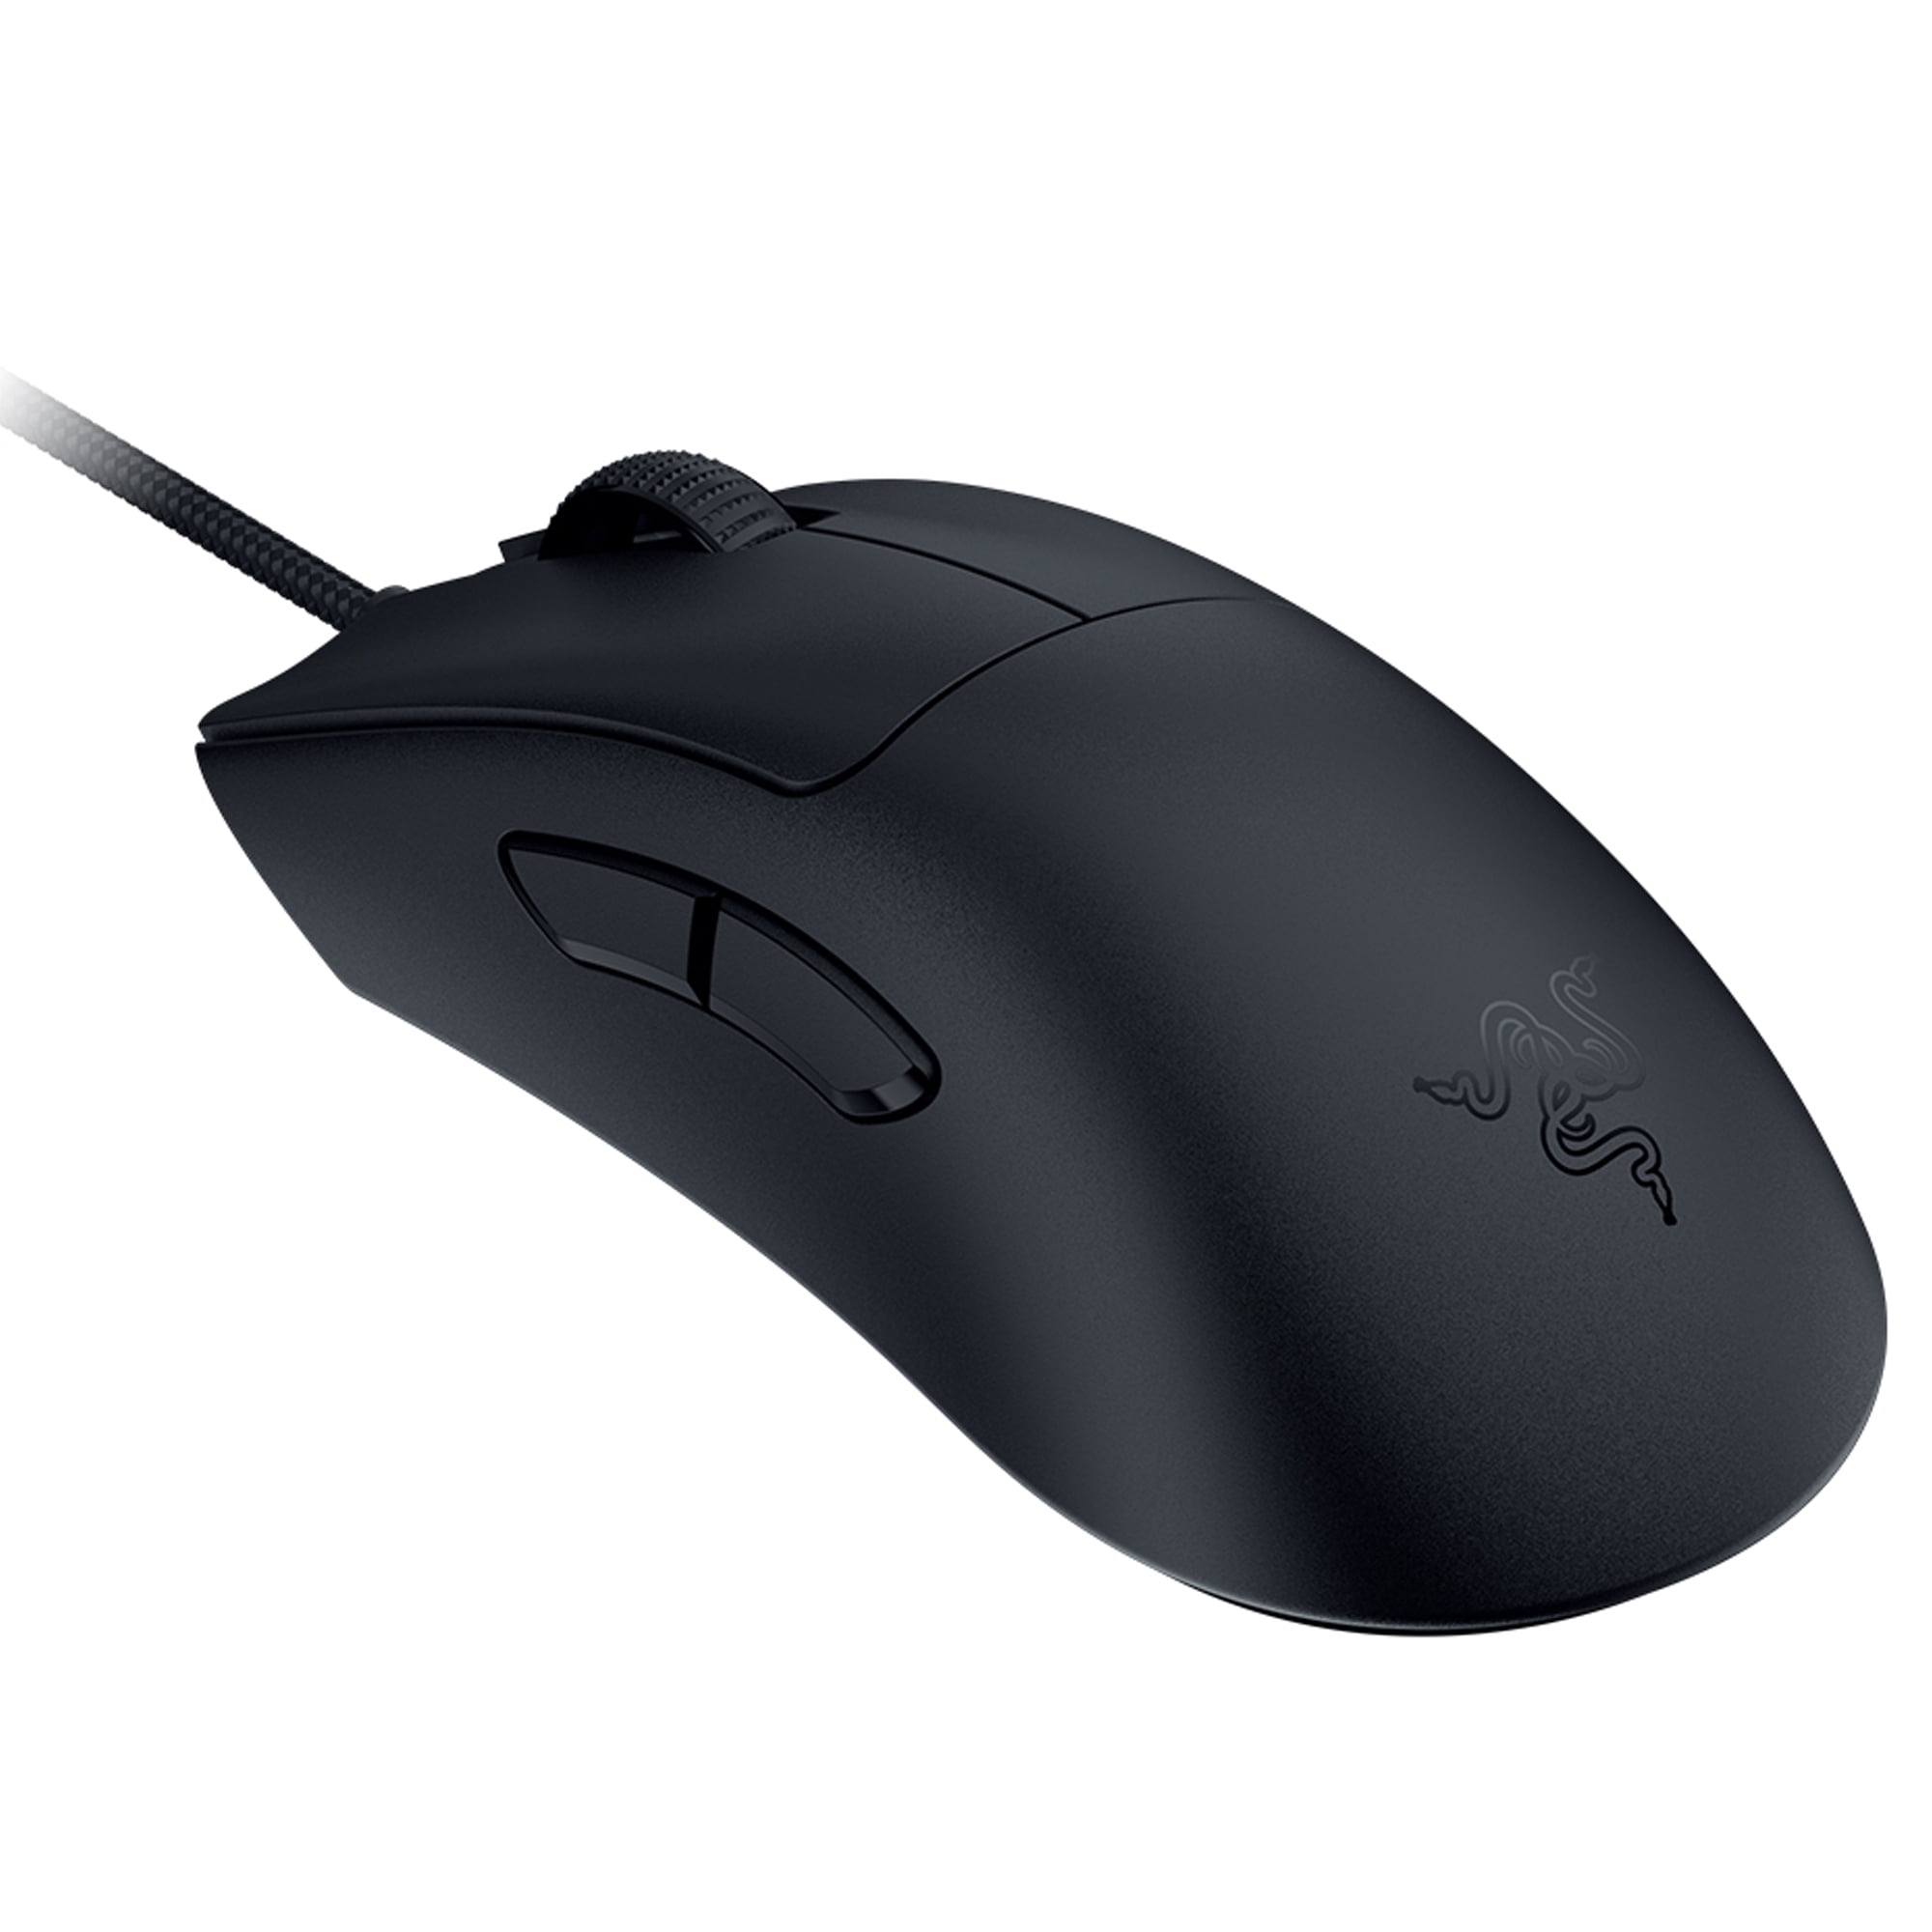 for Wired Ultra-lightweight, V3 DeathAdder Gaming Ergonomic, Mouse 6 Black PC, Buttons, Esports